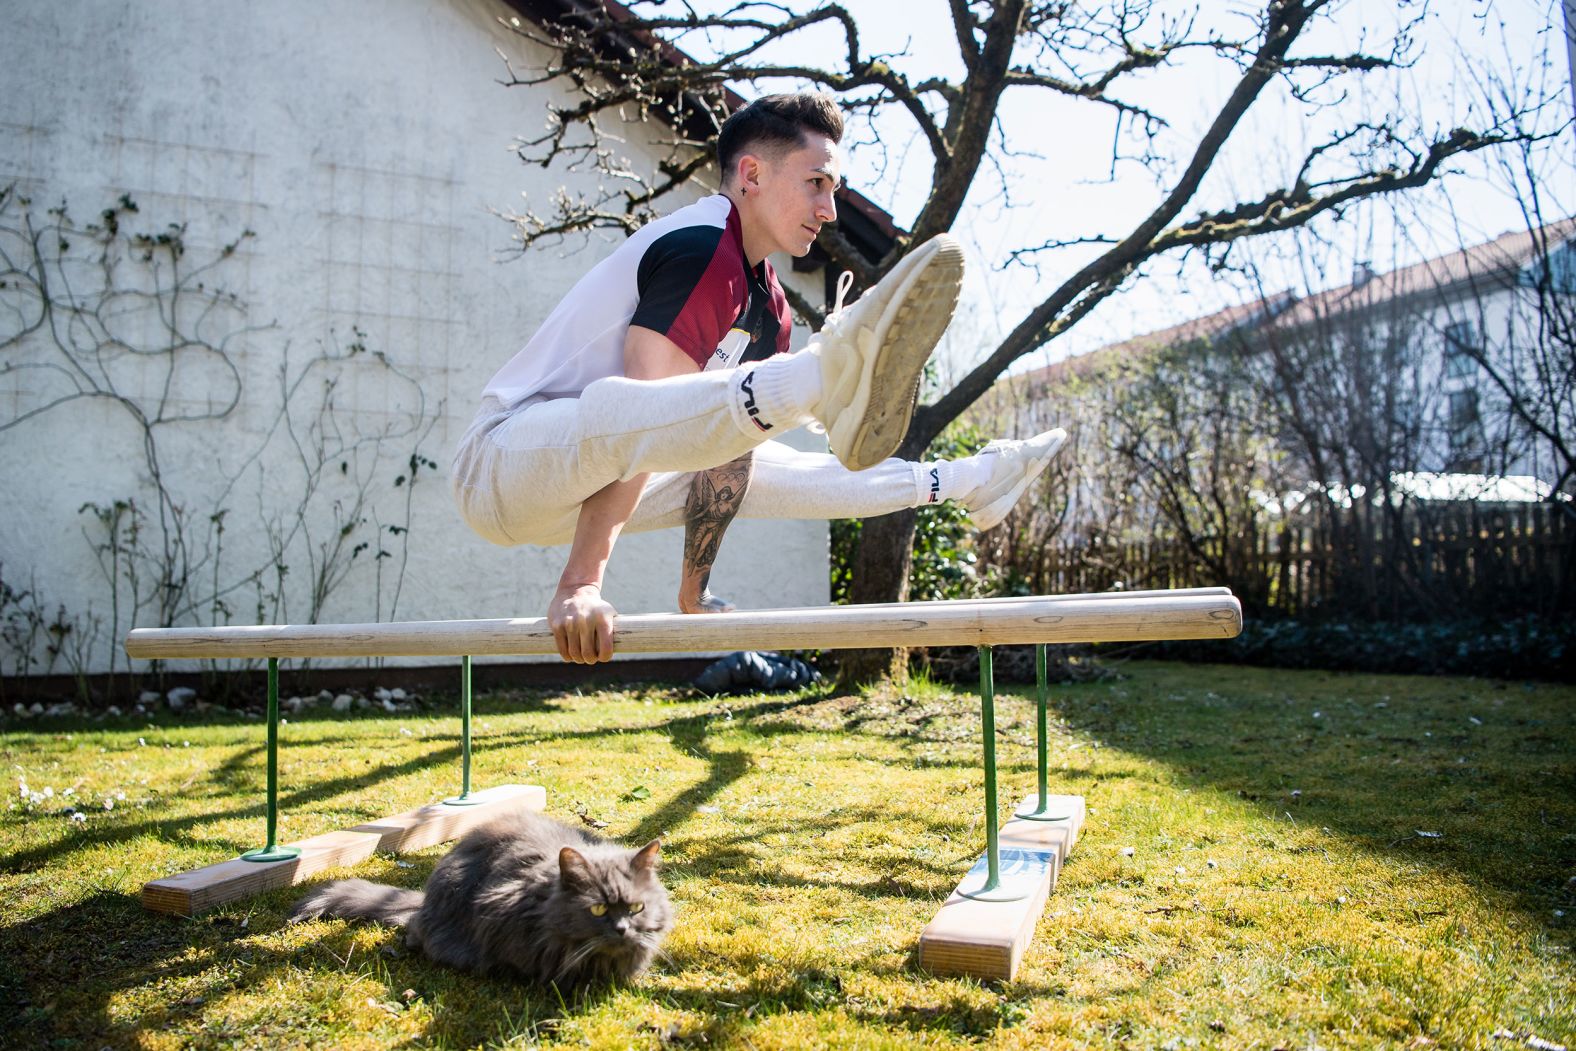 German gymnast Marcel Nguyen, who won two silver medals at the 2012 Olympics, trains in his mother's garden in Unterhaching, Germany, on March 24.